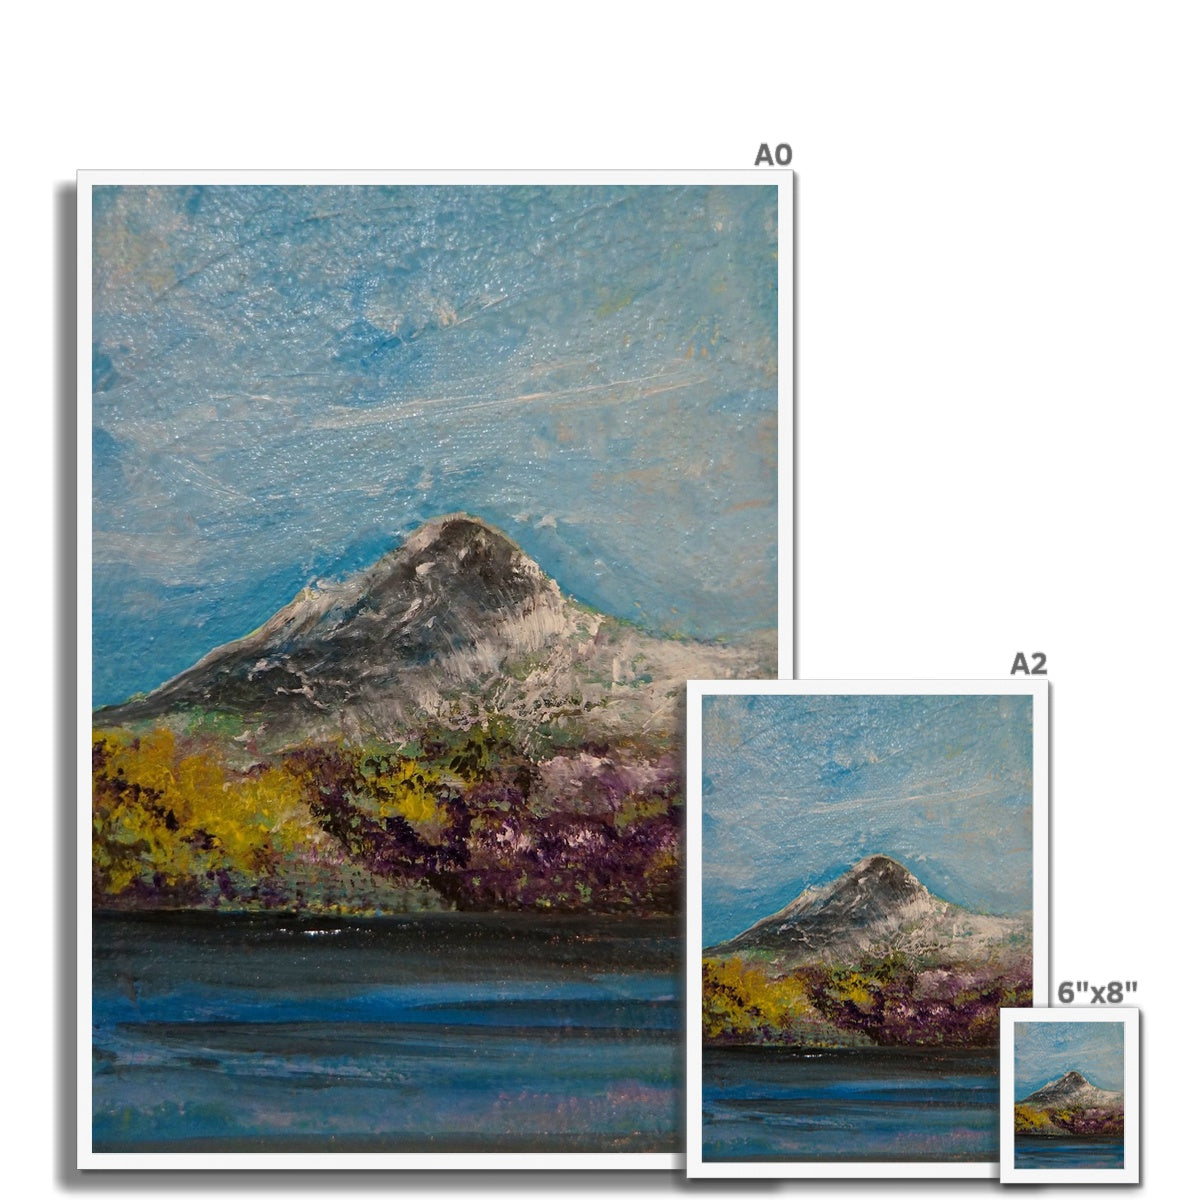 Ben Lomond ii Painting | Framed Prints From Scotland-Framed Prints-Scottish Lochs & Mountains Art Gallery-Paintings, Prints, Homeware, Art Gifts From Scotland By Scottish Artist Kevin Hunter